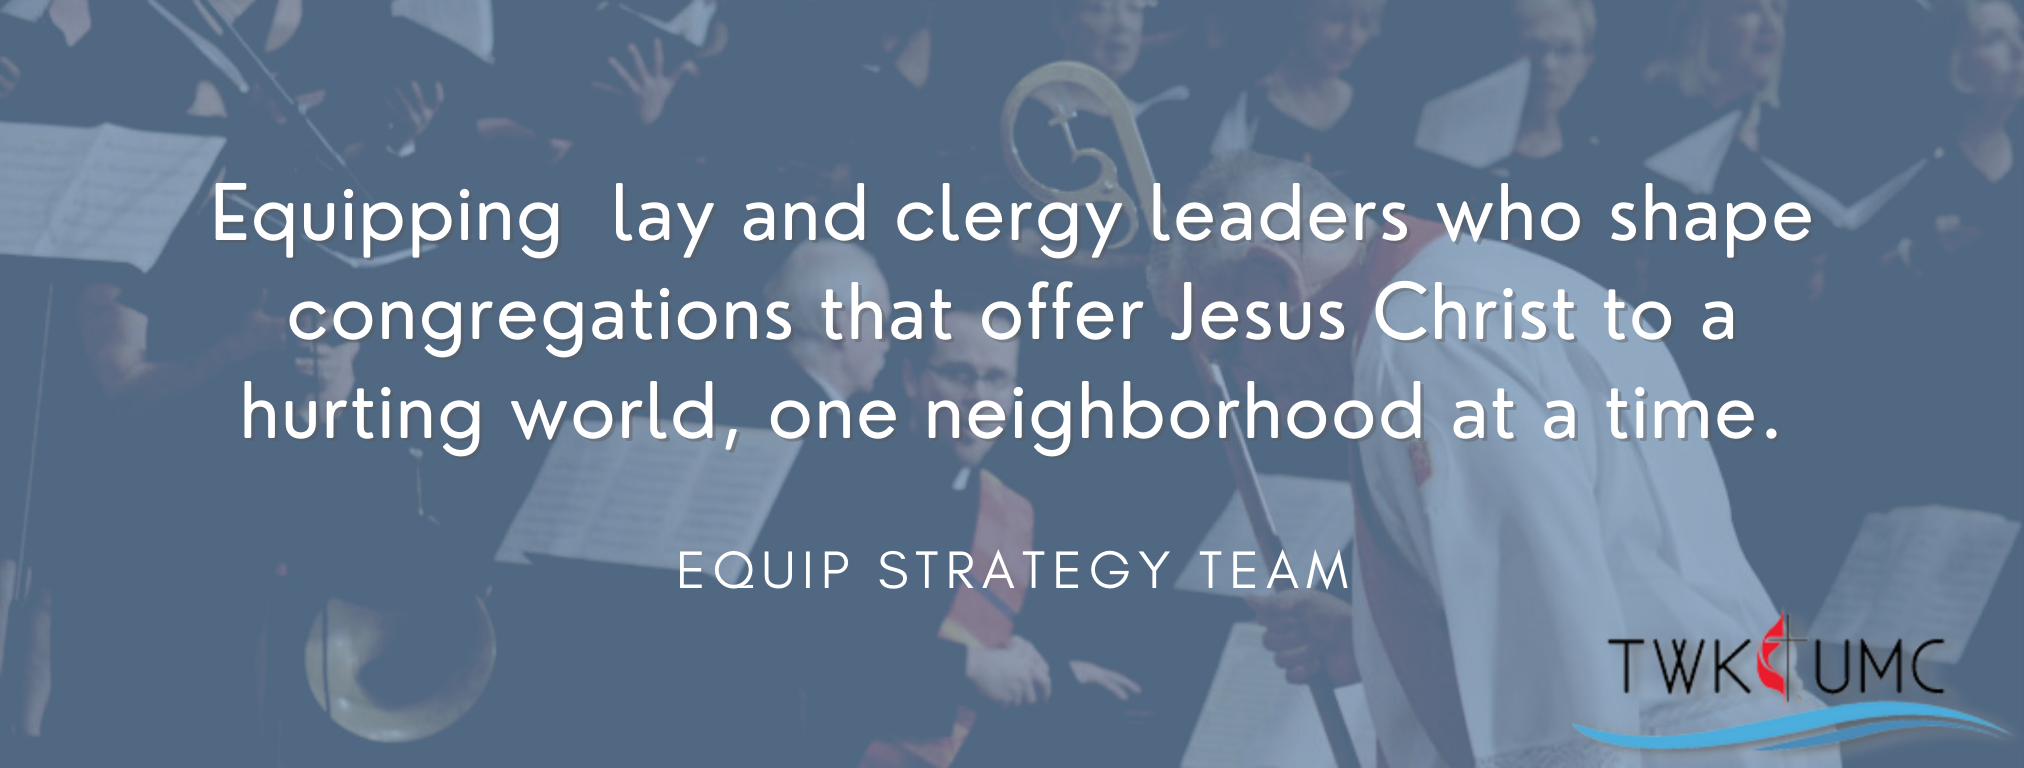 Equip Strategy Team Banner. Text: Equipping lay and clergy leaders who shape congregations that offer Jesus Christ to a hurting world, one neighborhood at a time.